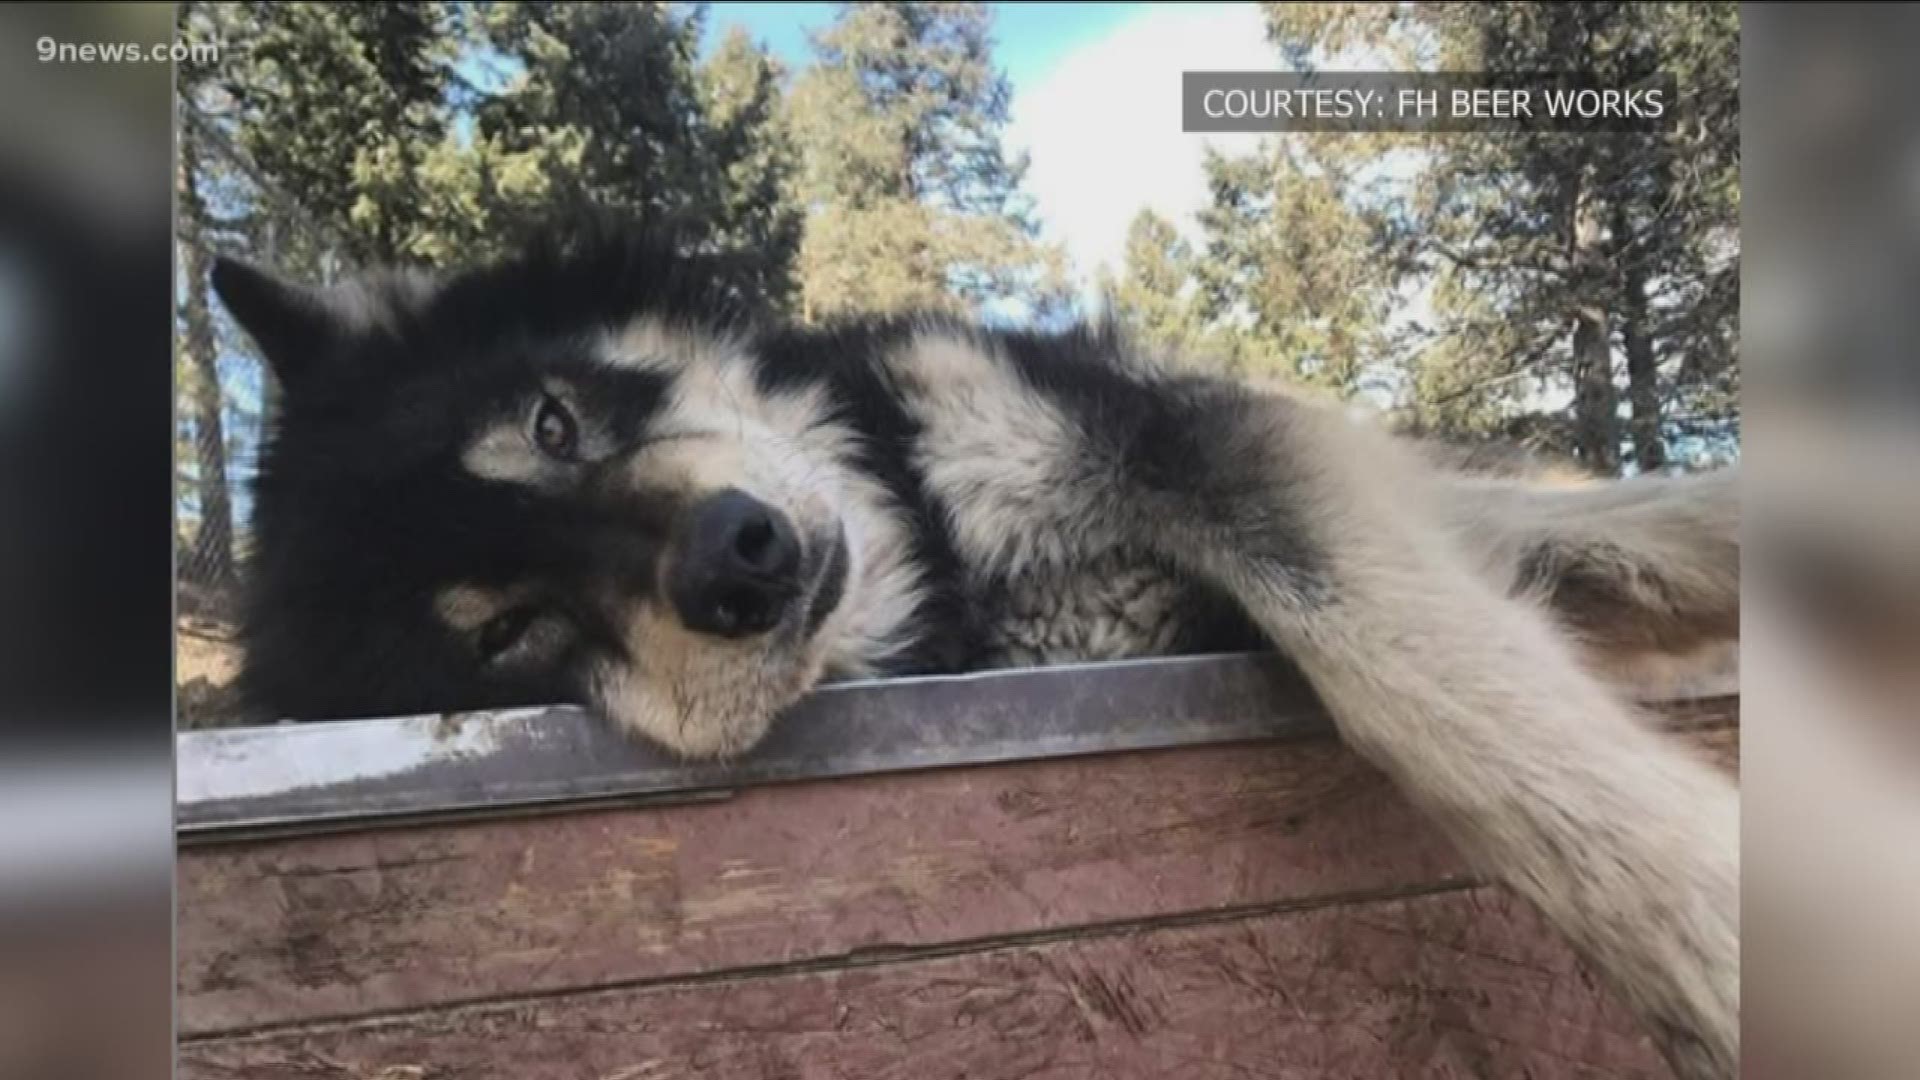 A nonprofit in Sedalia will be taking in the animals so the wolves will continue to interact with people in the same manner as they did at the foundation.